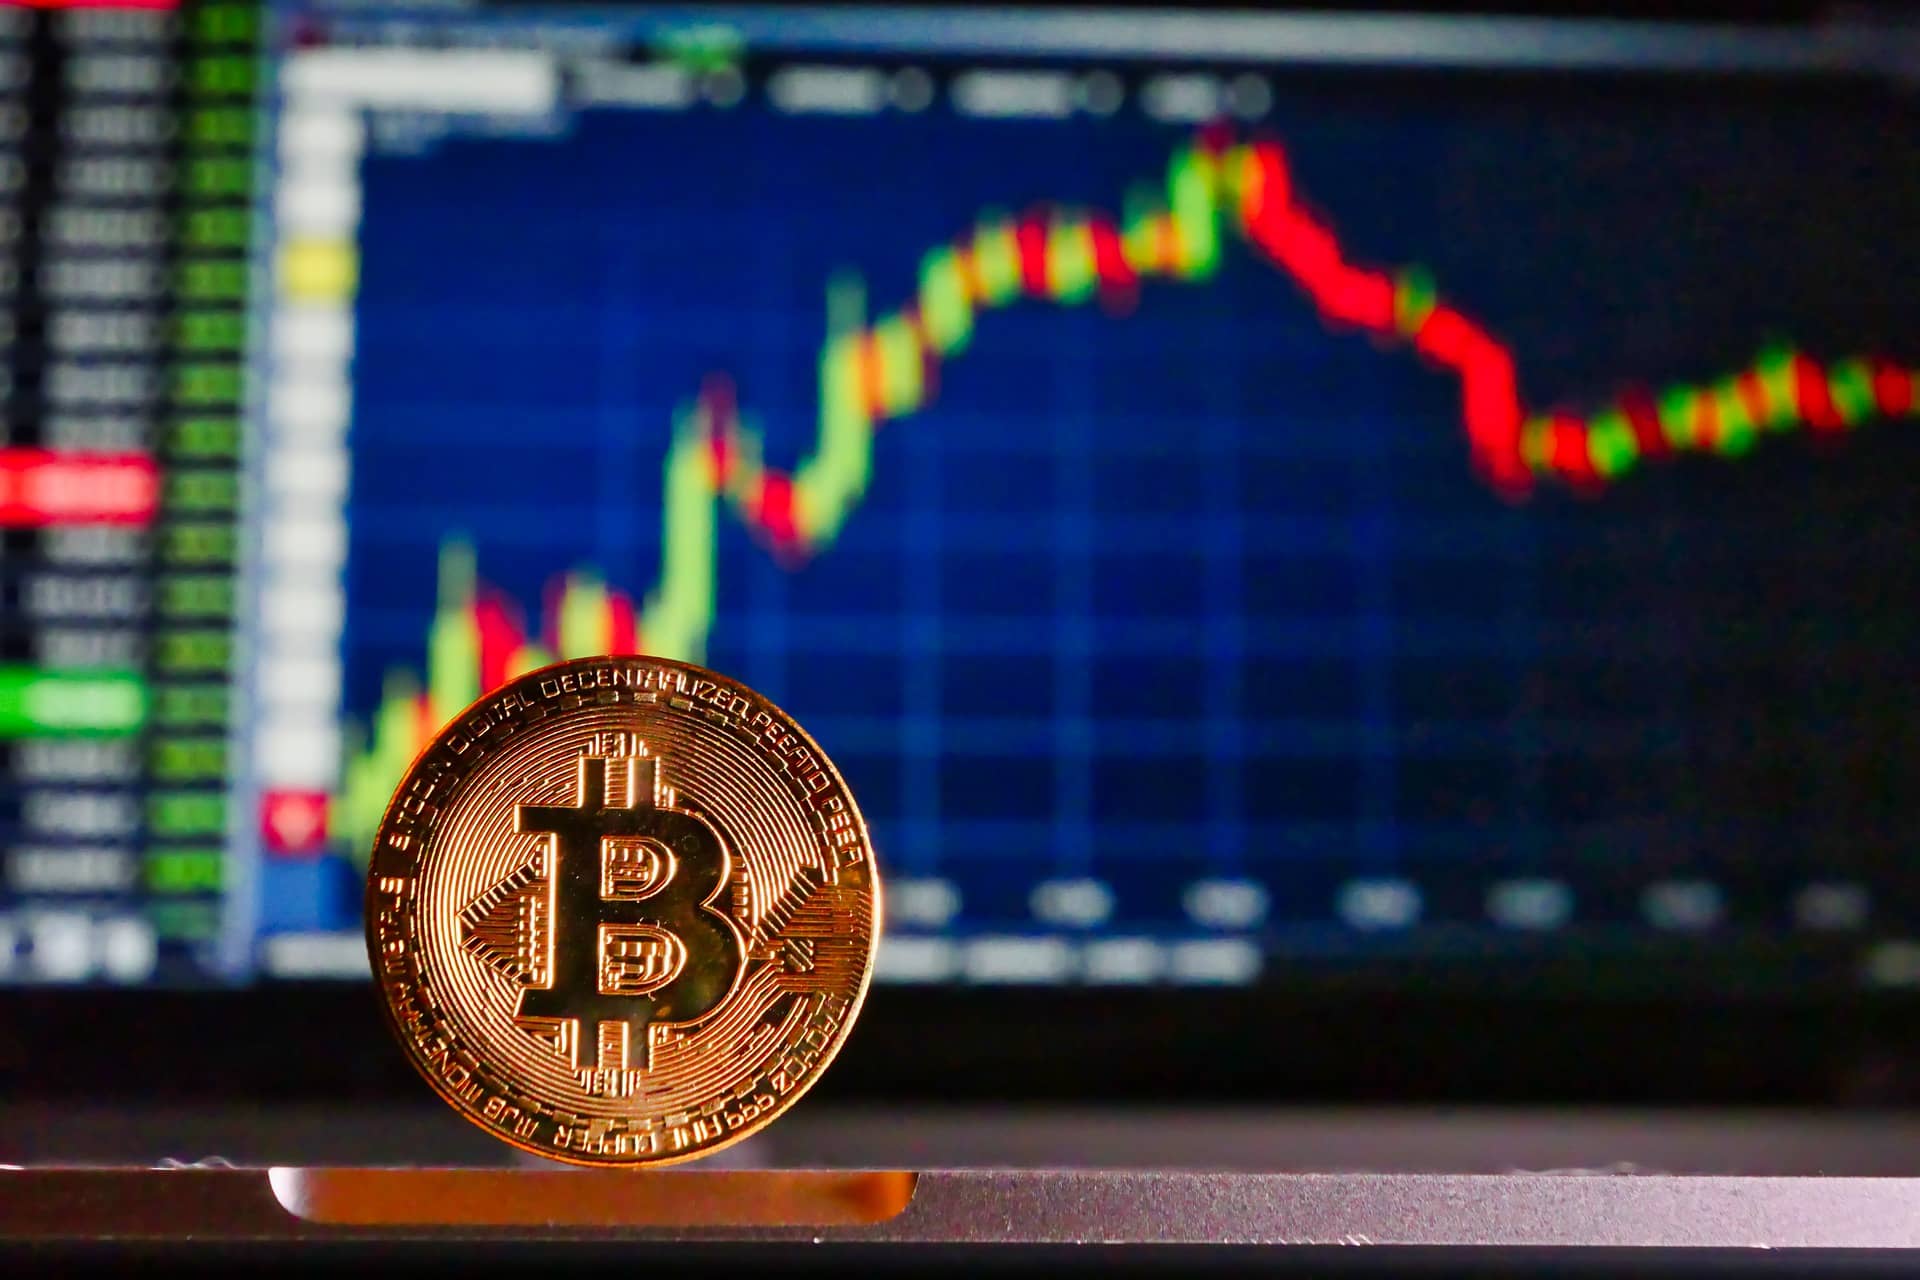 Bitcoin Halving Model Suggests $24,000 Bottom Before Year’s End